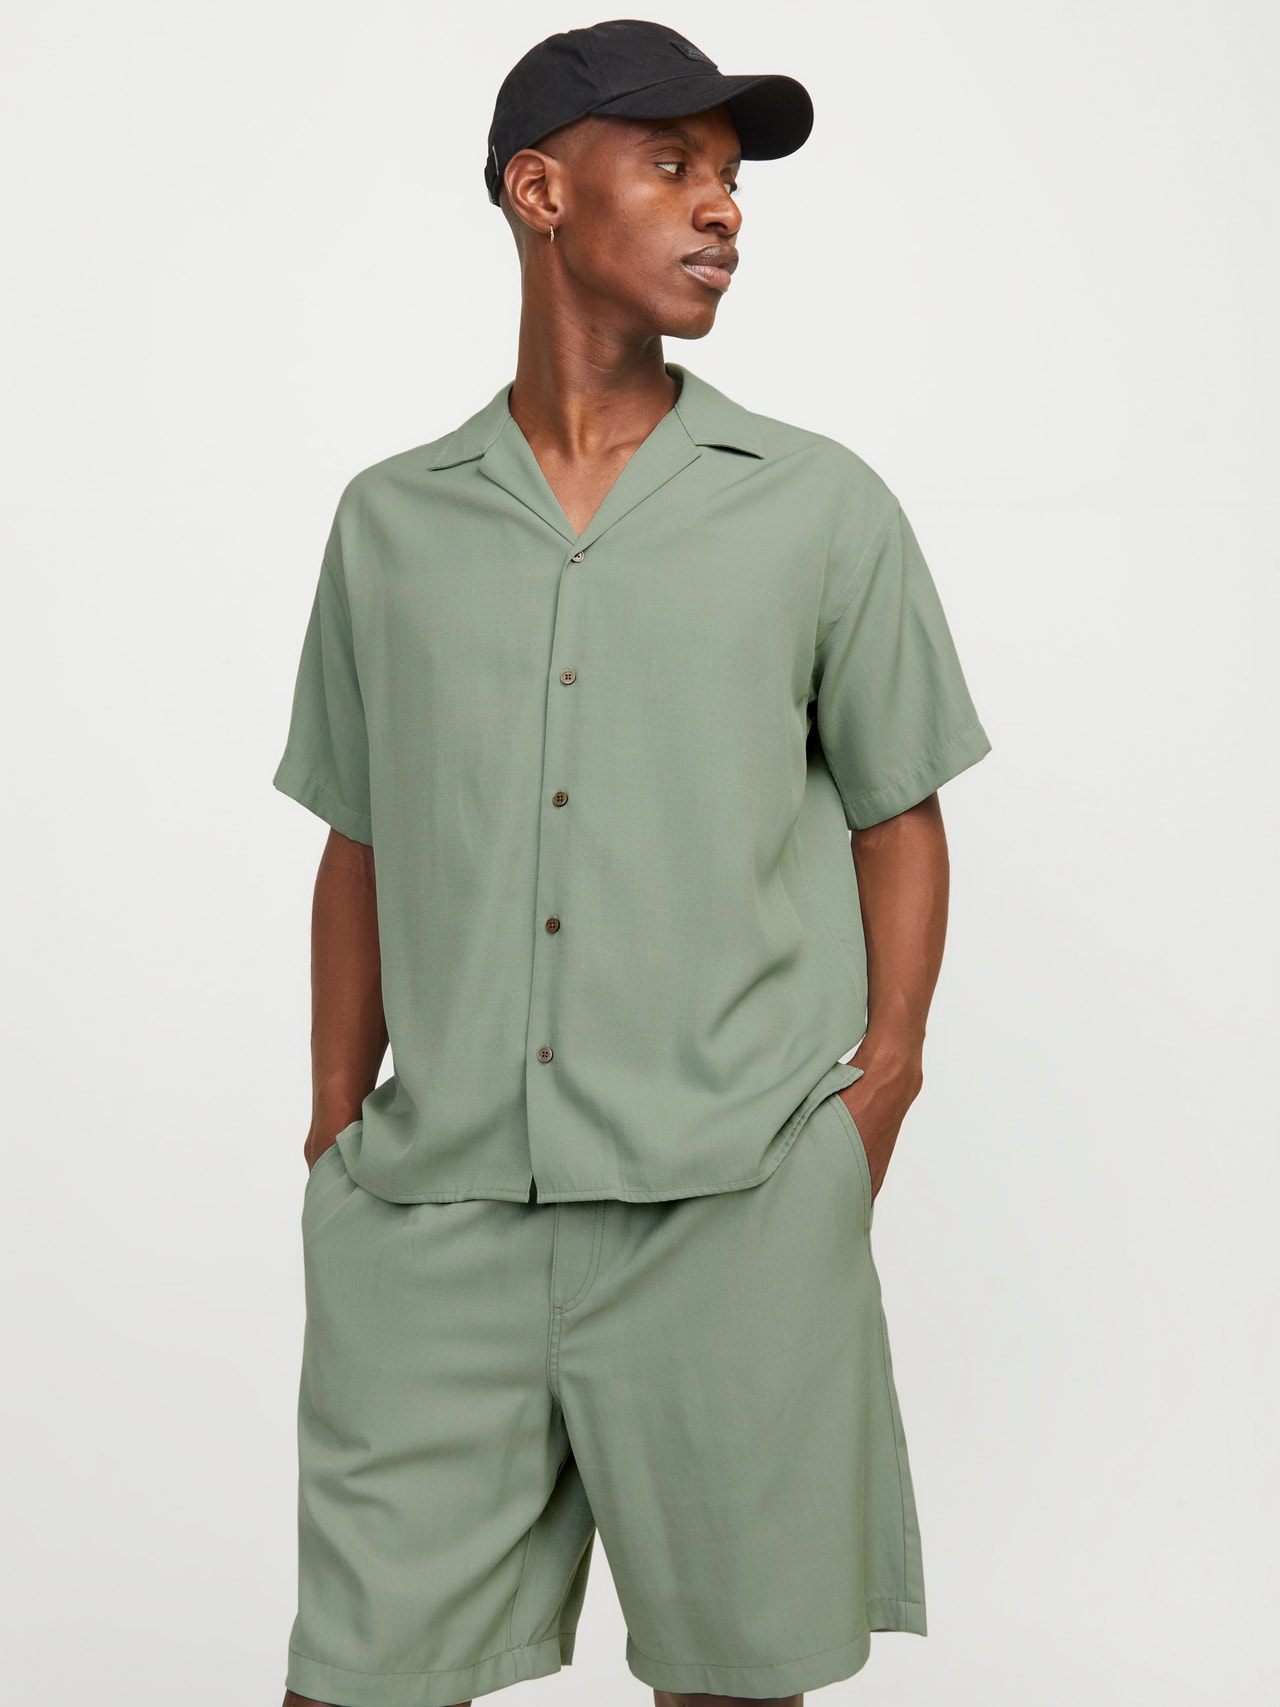 Jack & Jones Camisa Relaxed Fit -Lily Pad - 12251027